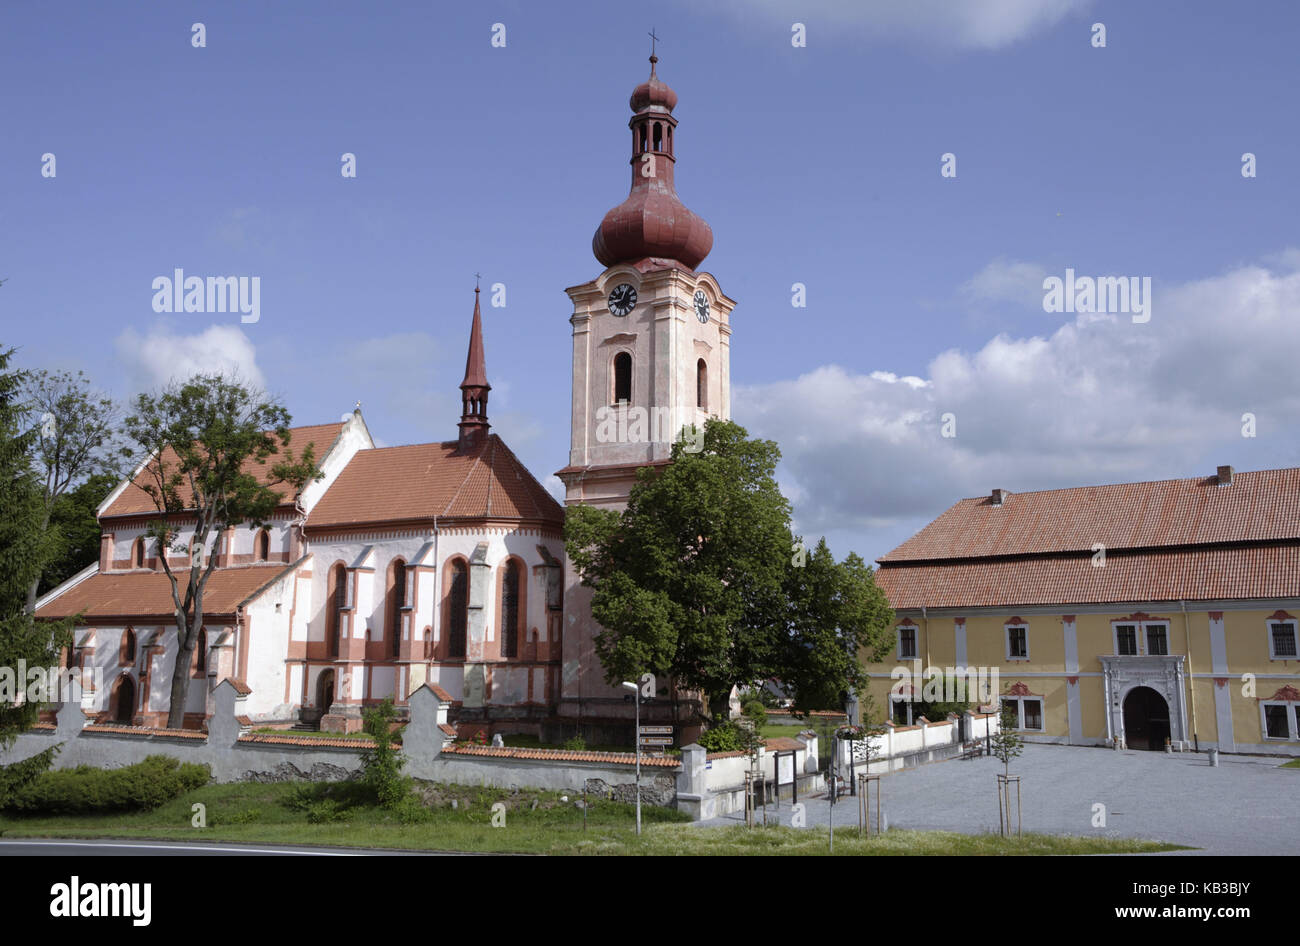 The Gothic St. Jakobuskirche on the Pschesanitzer space, town Nepomuk, west Bohemian, Czechia, Europe, Stock Photo